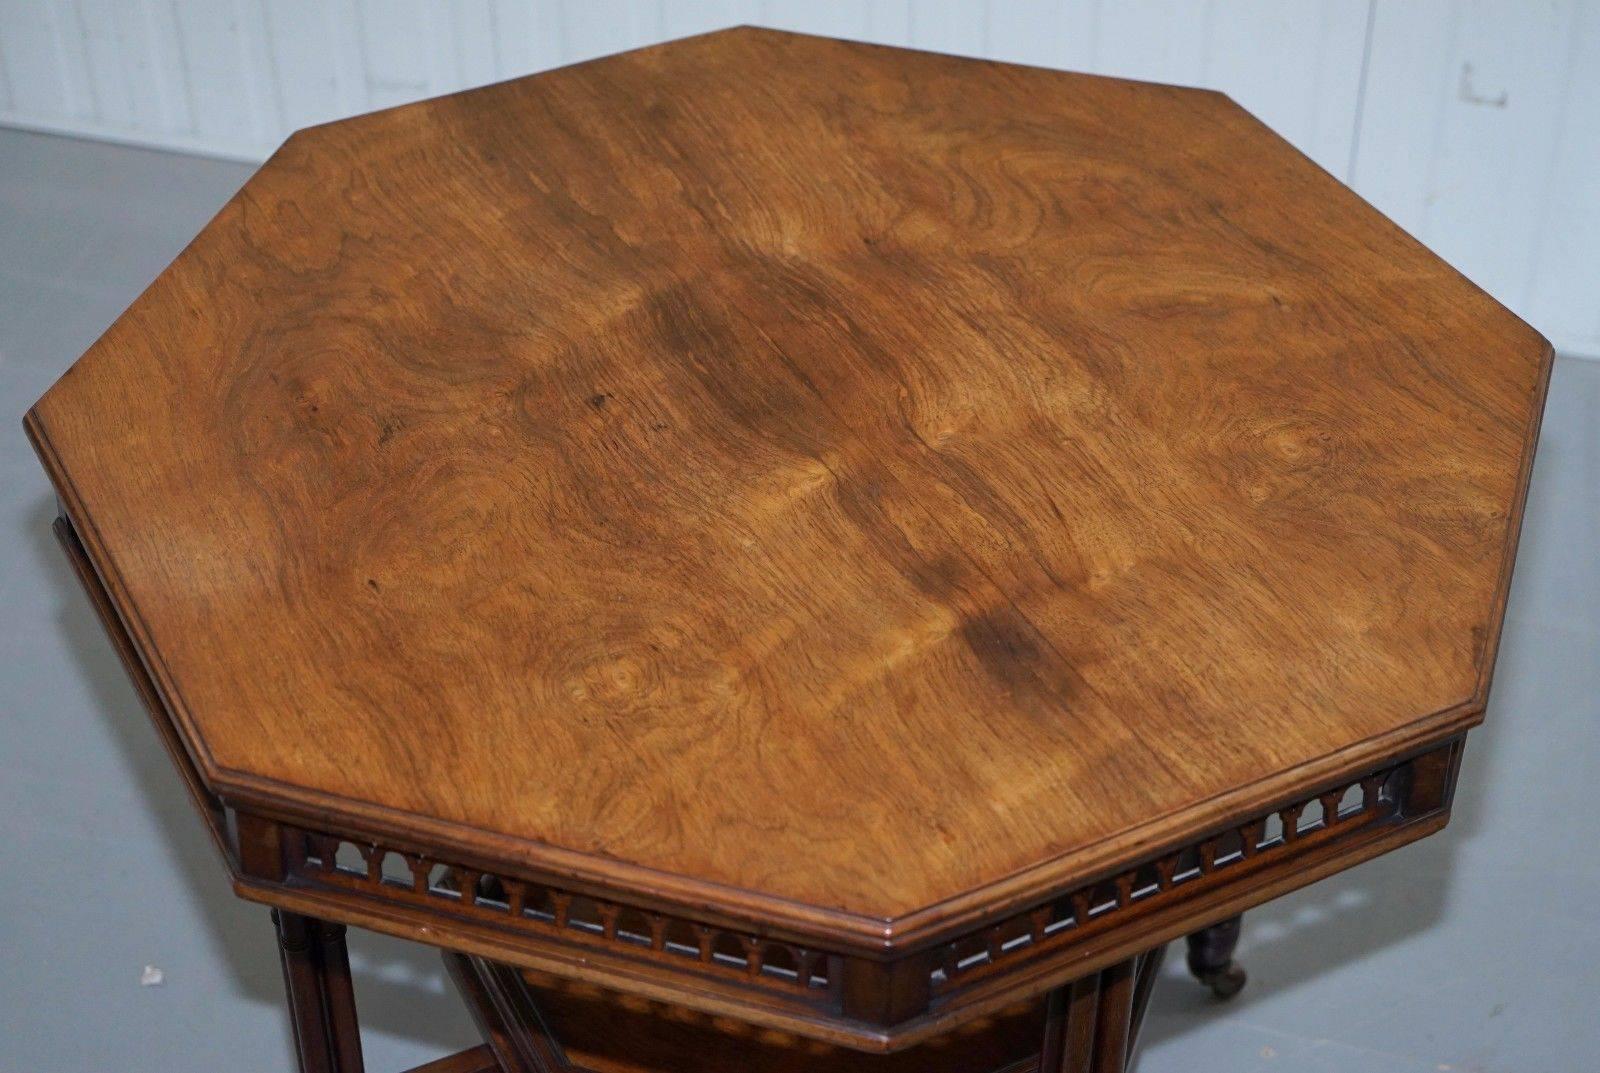 Wimbledon-Furniture is delighted to offer for sale this very rare Thomas Chippendale period clustered column leg hexagon occasional table in mahogany

This table is stunning, I would say late 18th century possible early 19th, the timber patina is